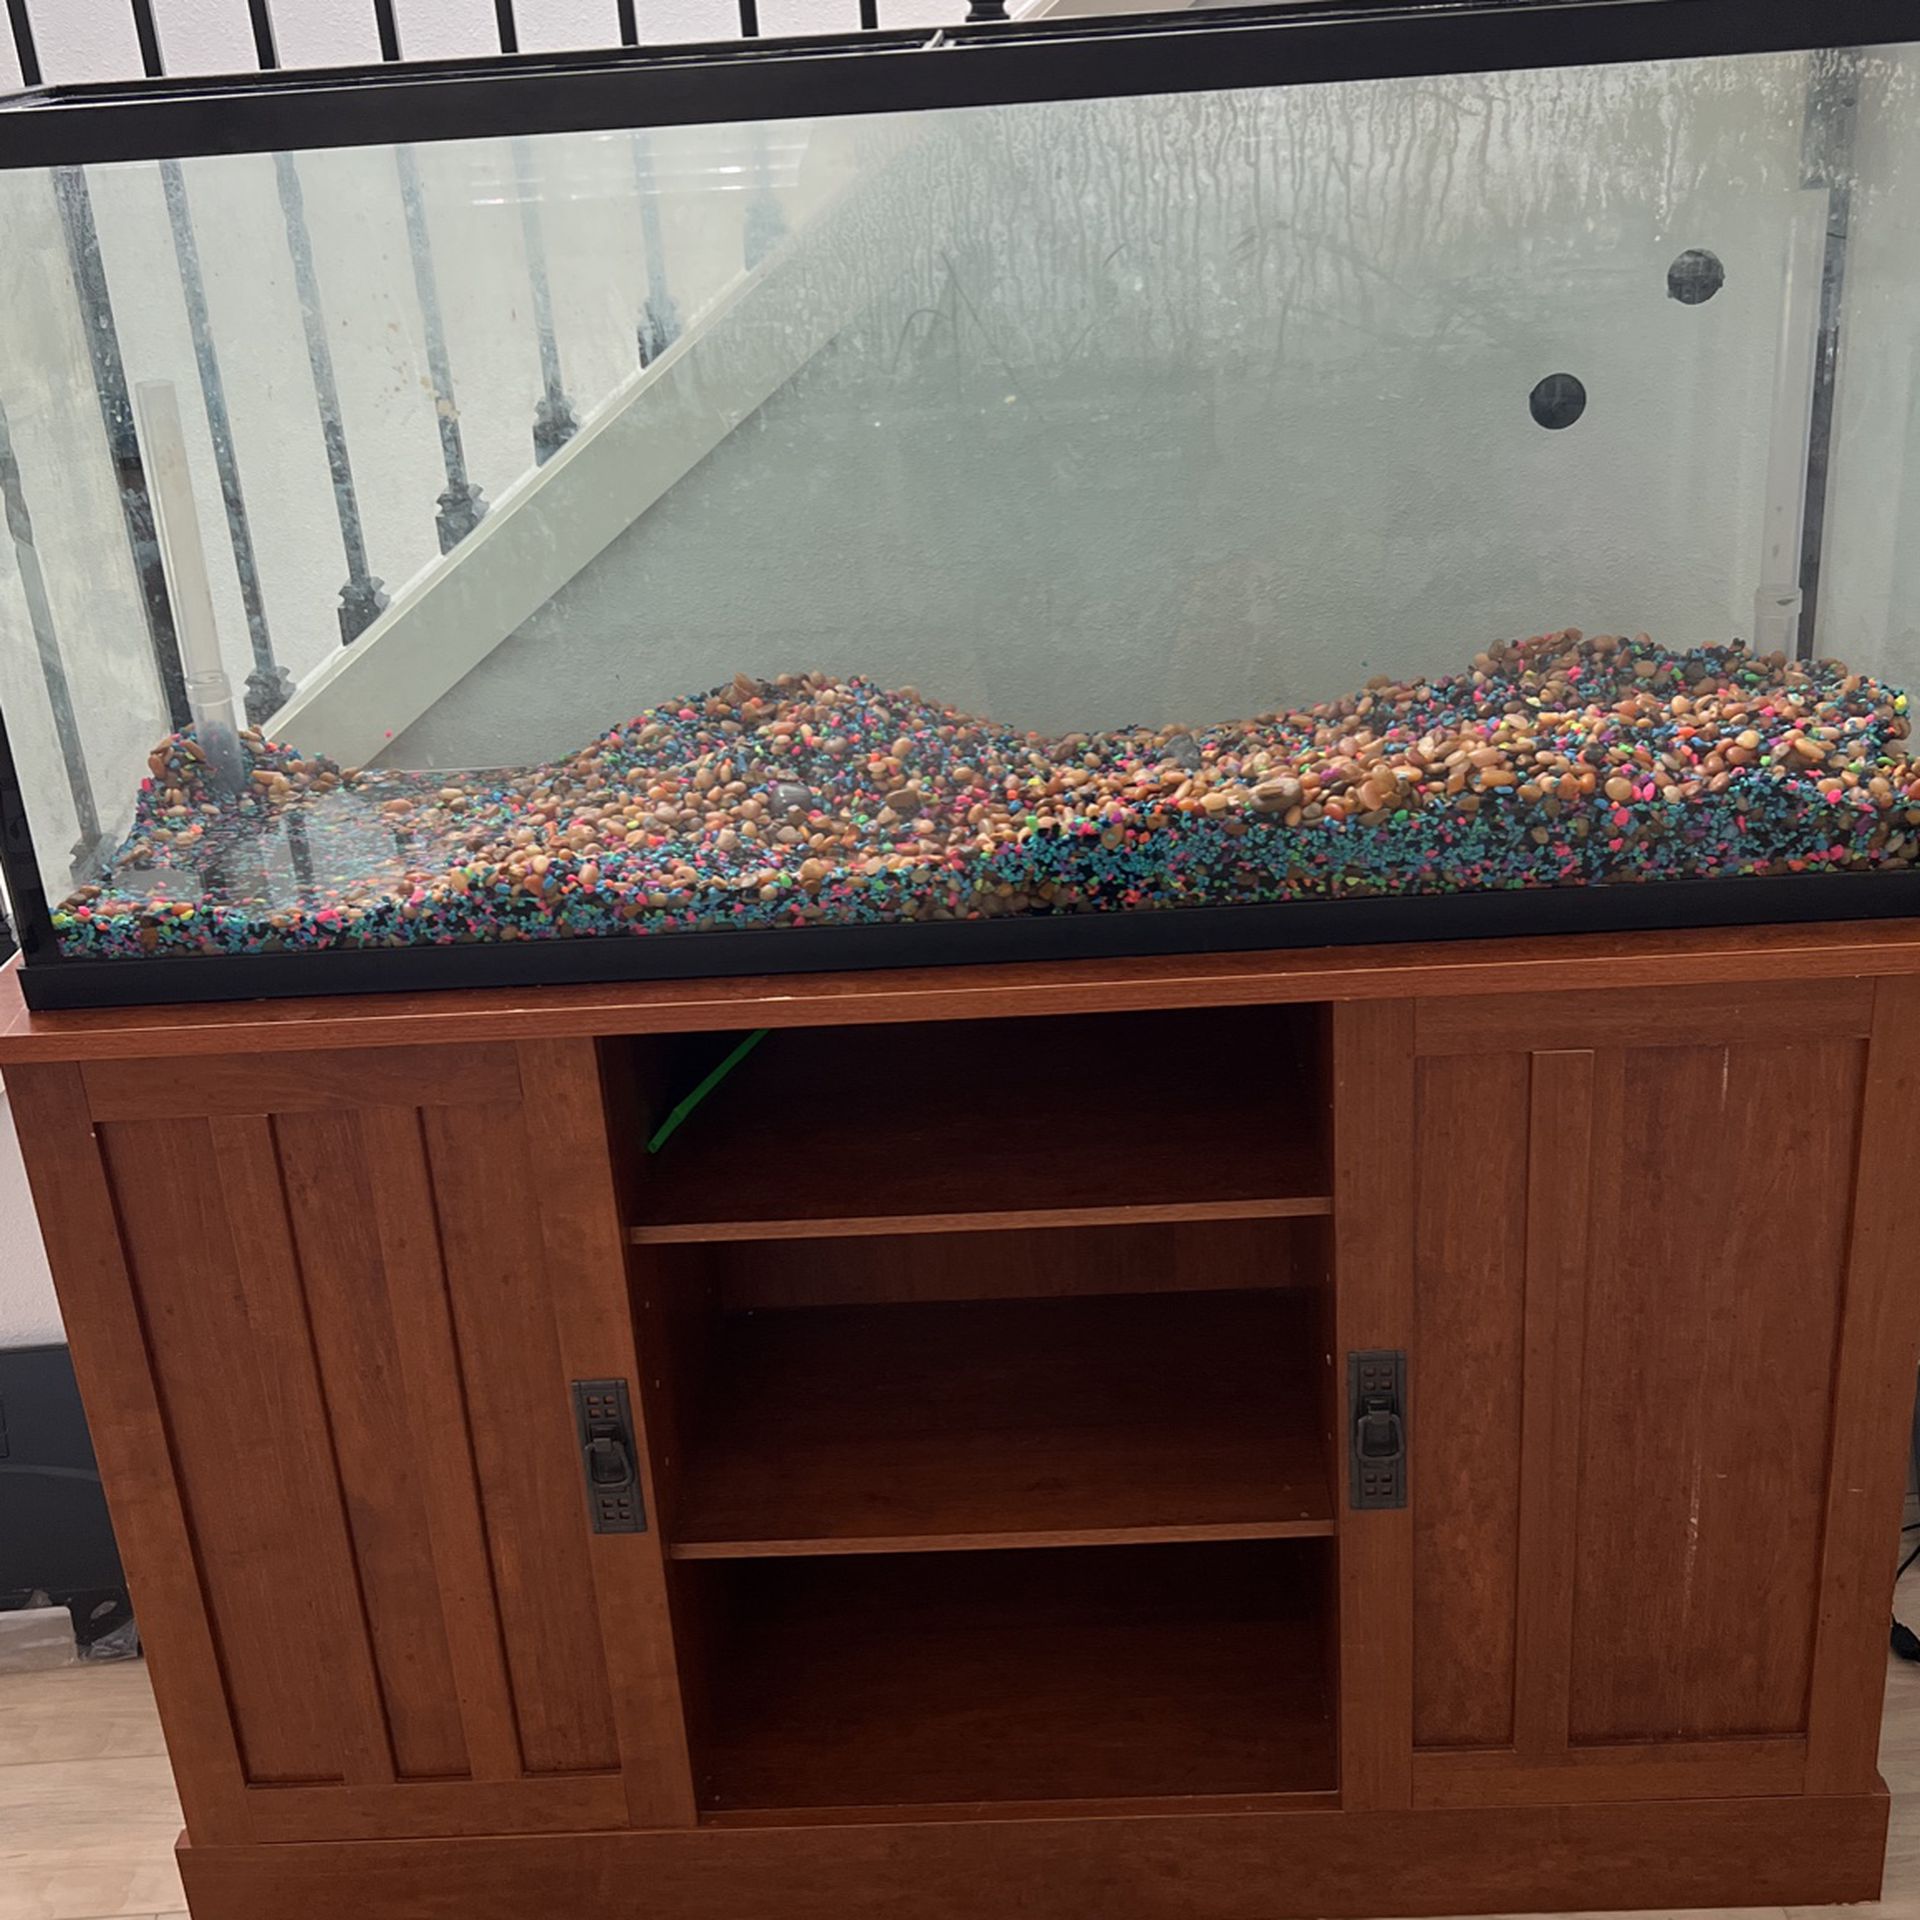 55 Gallon Fish Tank,  With heater And Filters + decorations And rocks